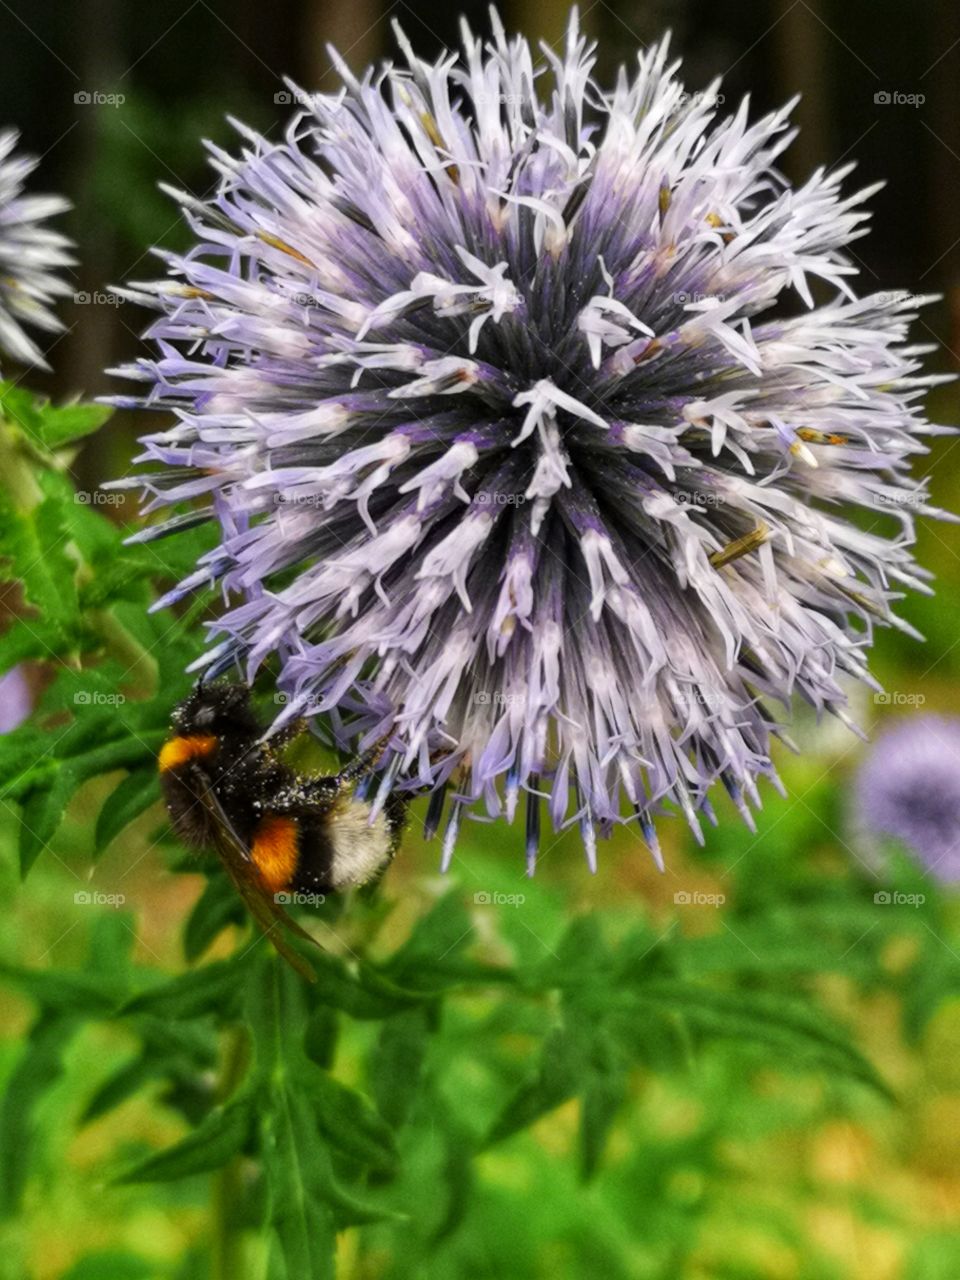 Bumblebee on the flower